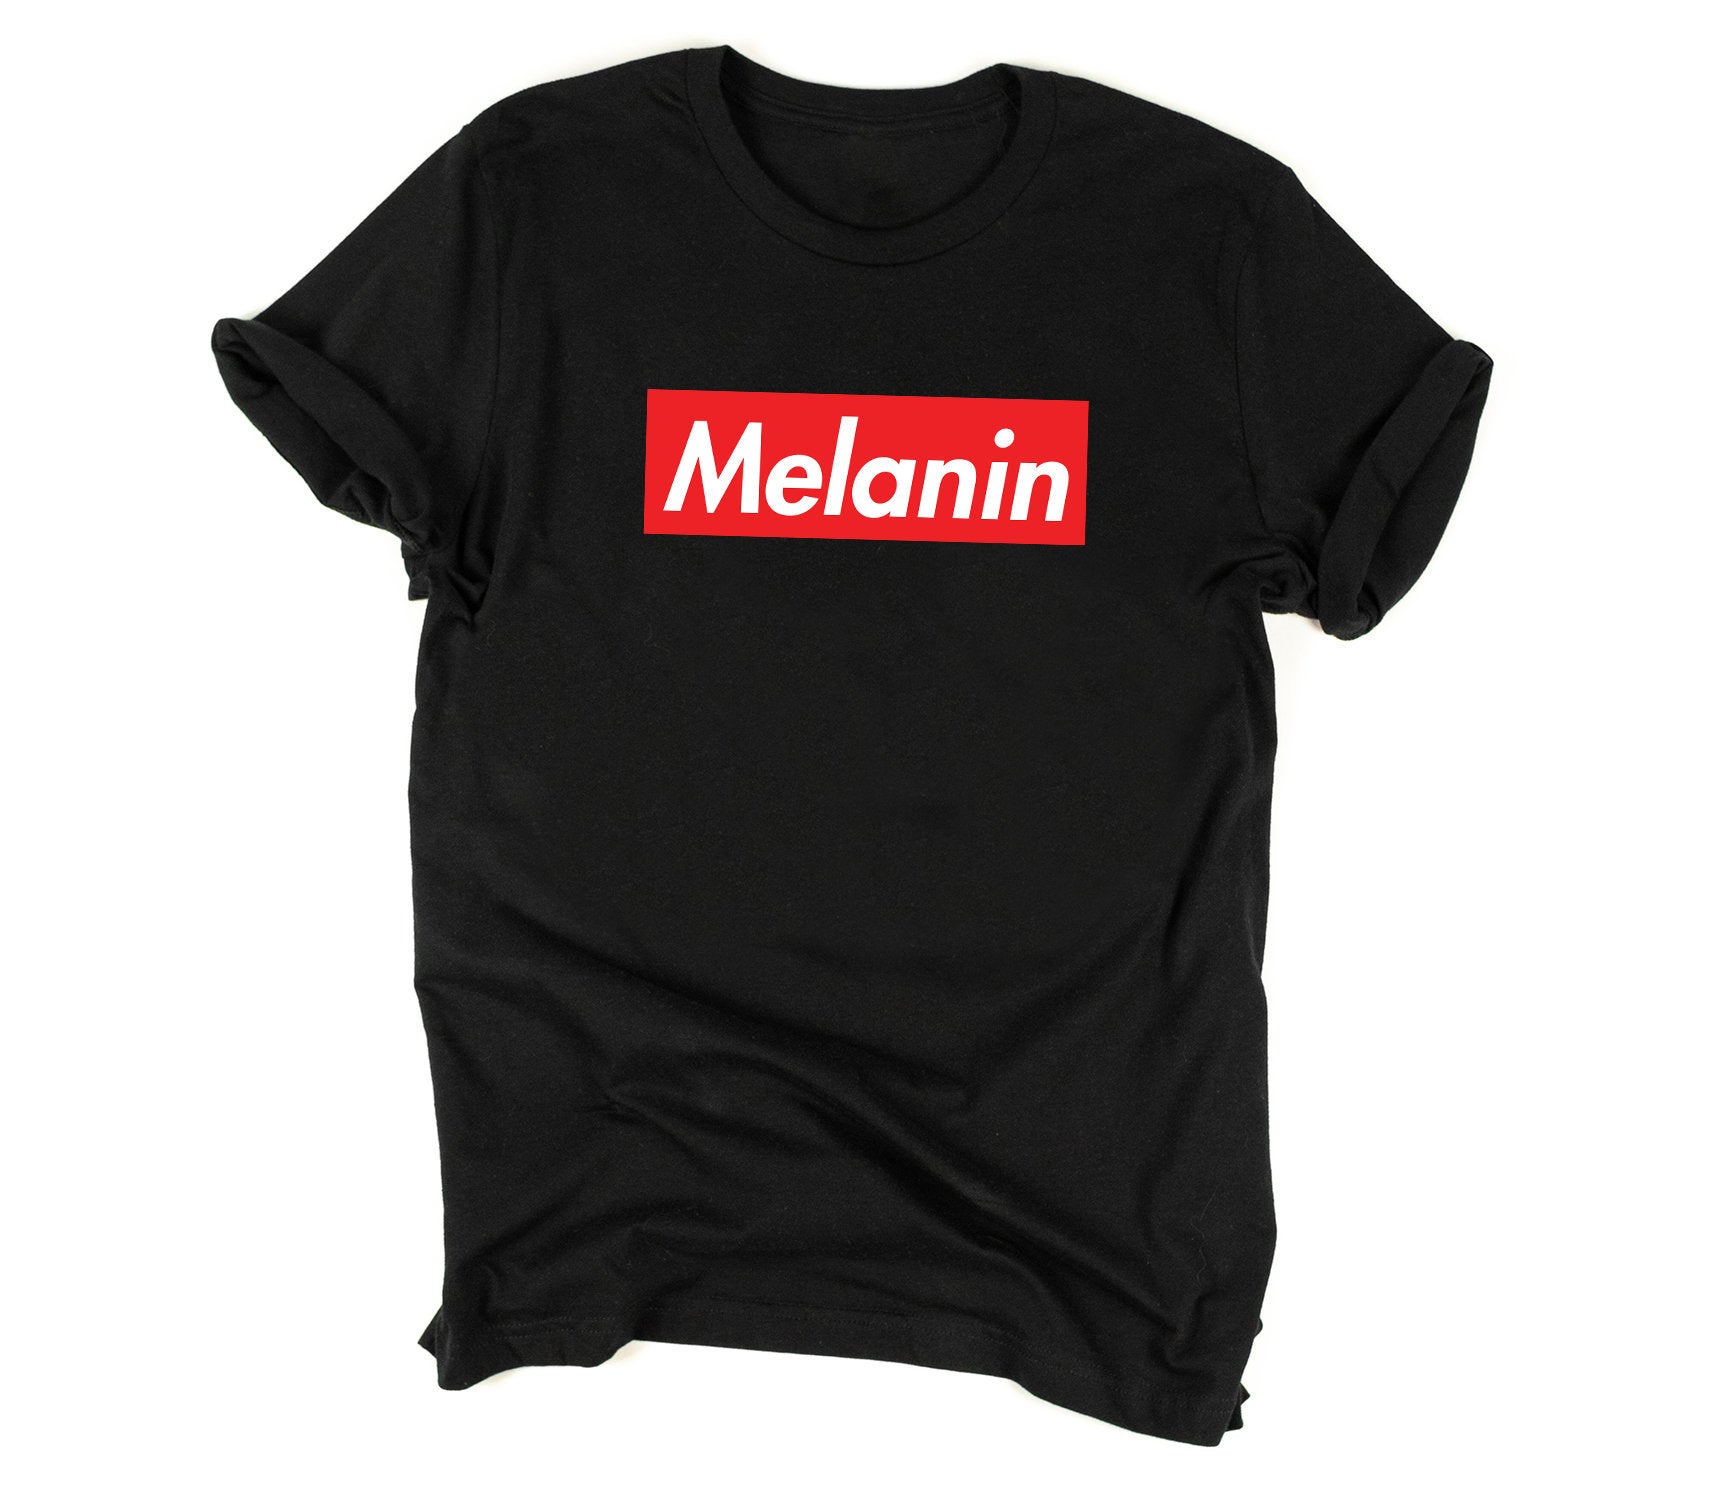 The 10 T-Shirts You Need to Celebrate Your Melanin at Essence Festival